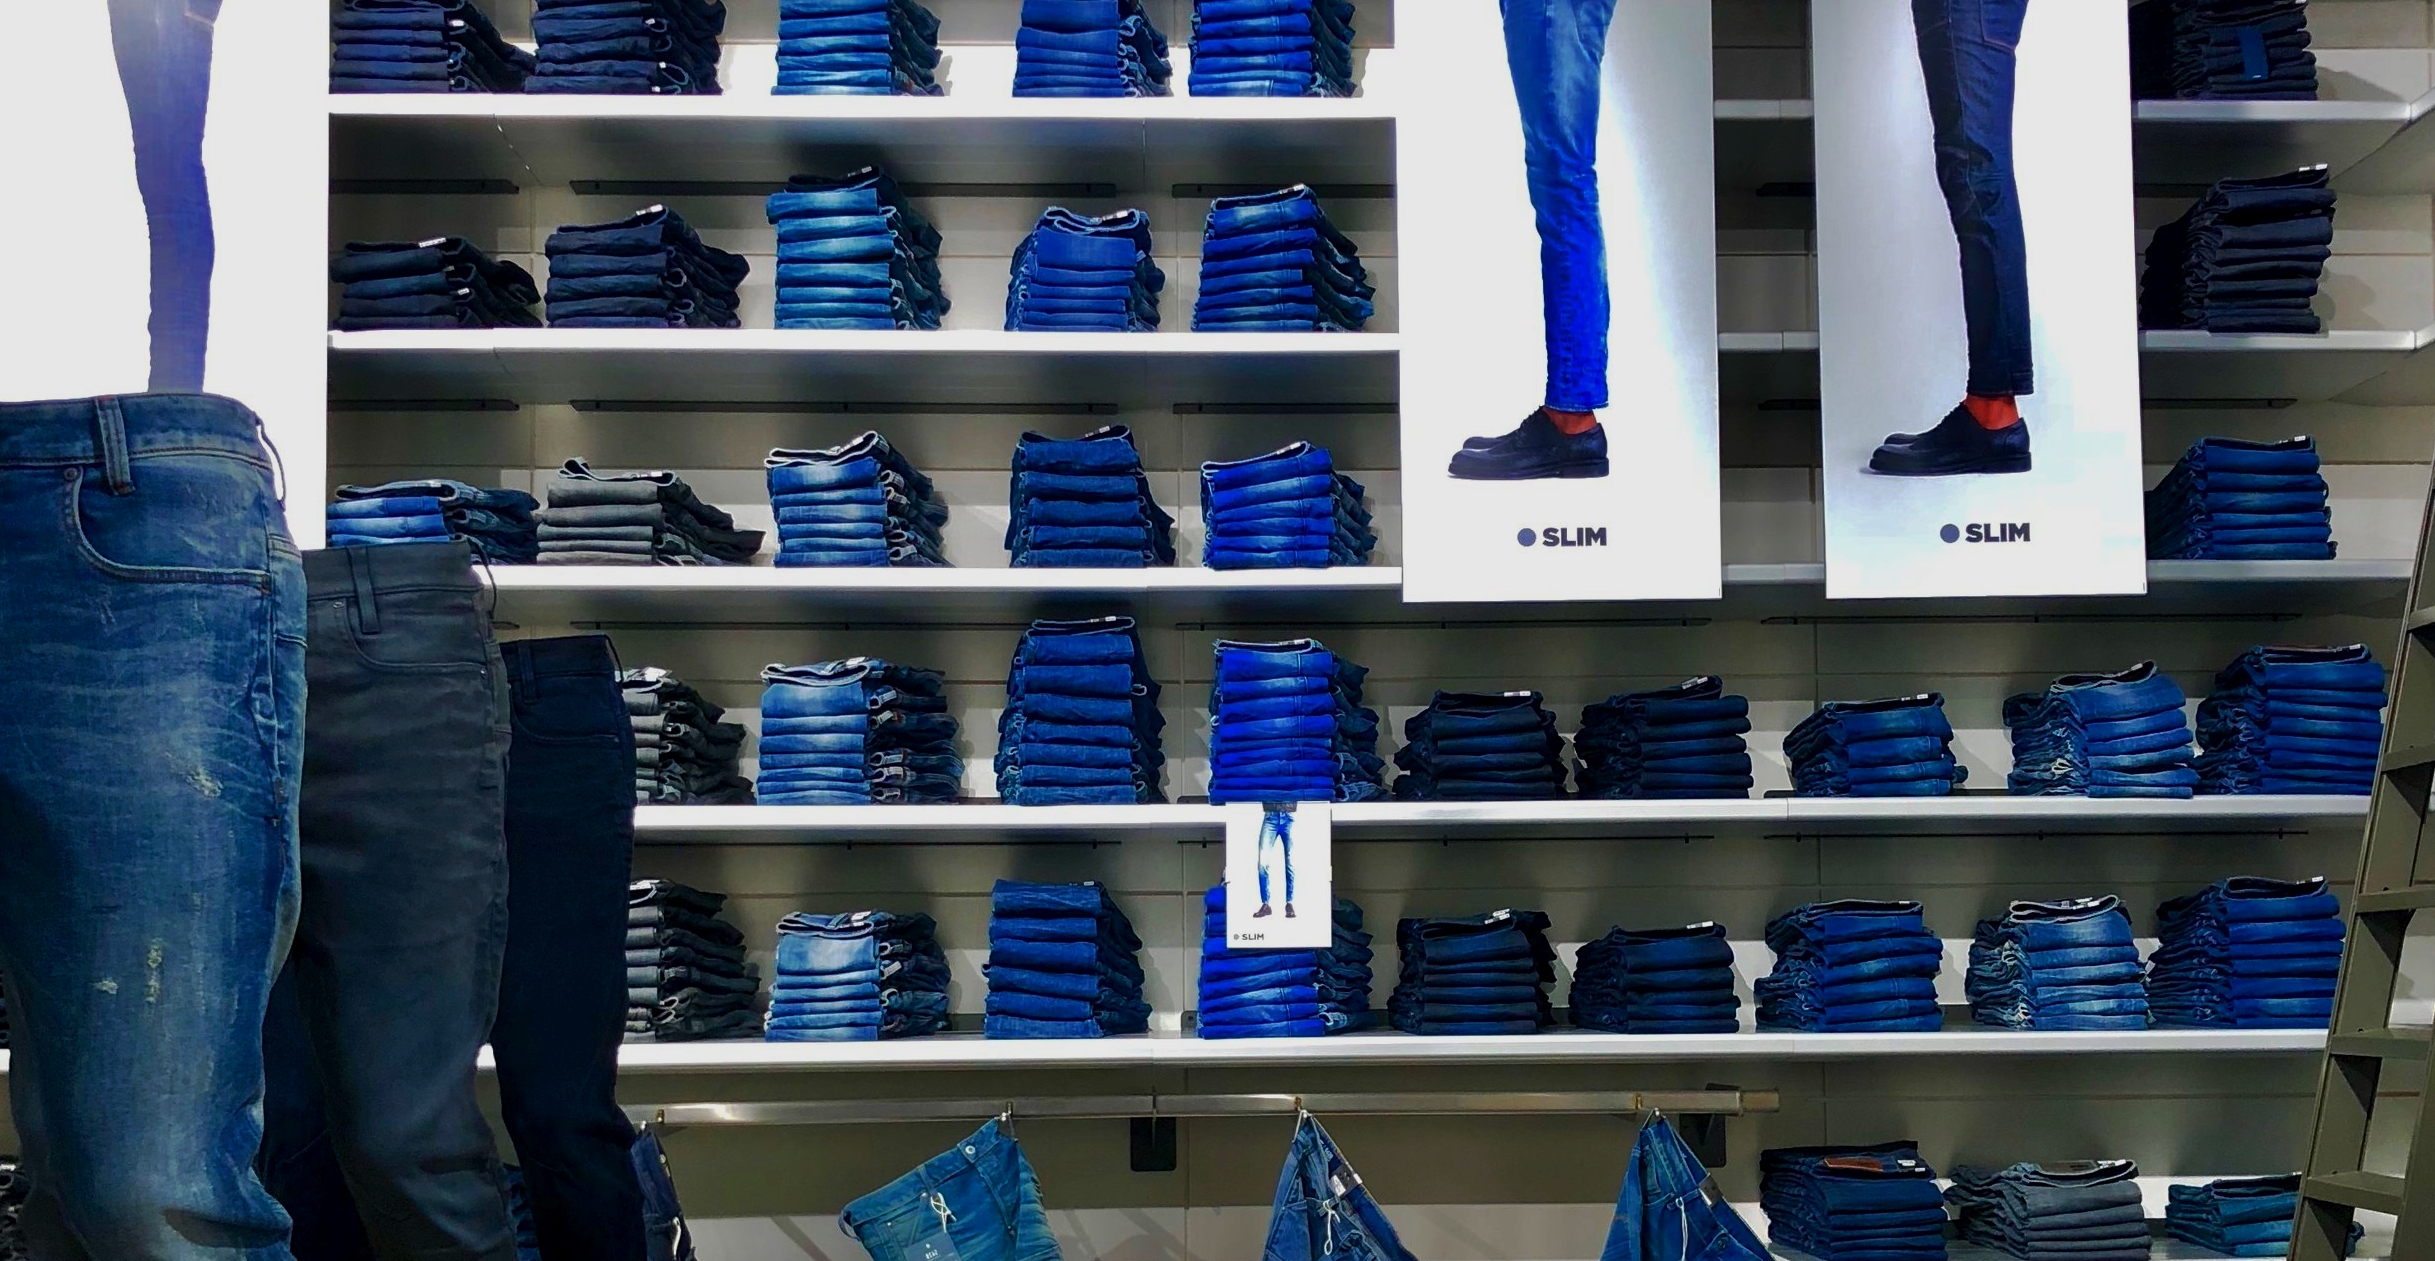 G-Star RAW opens new flagship at 